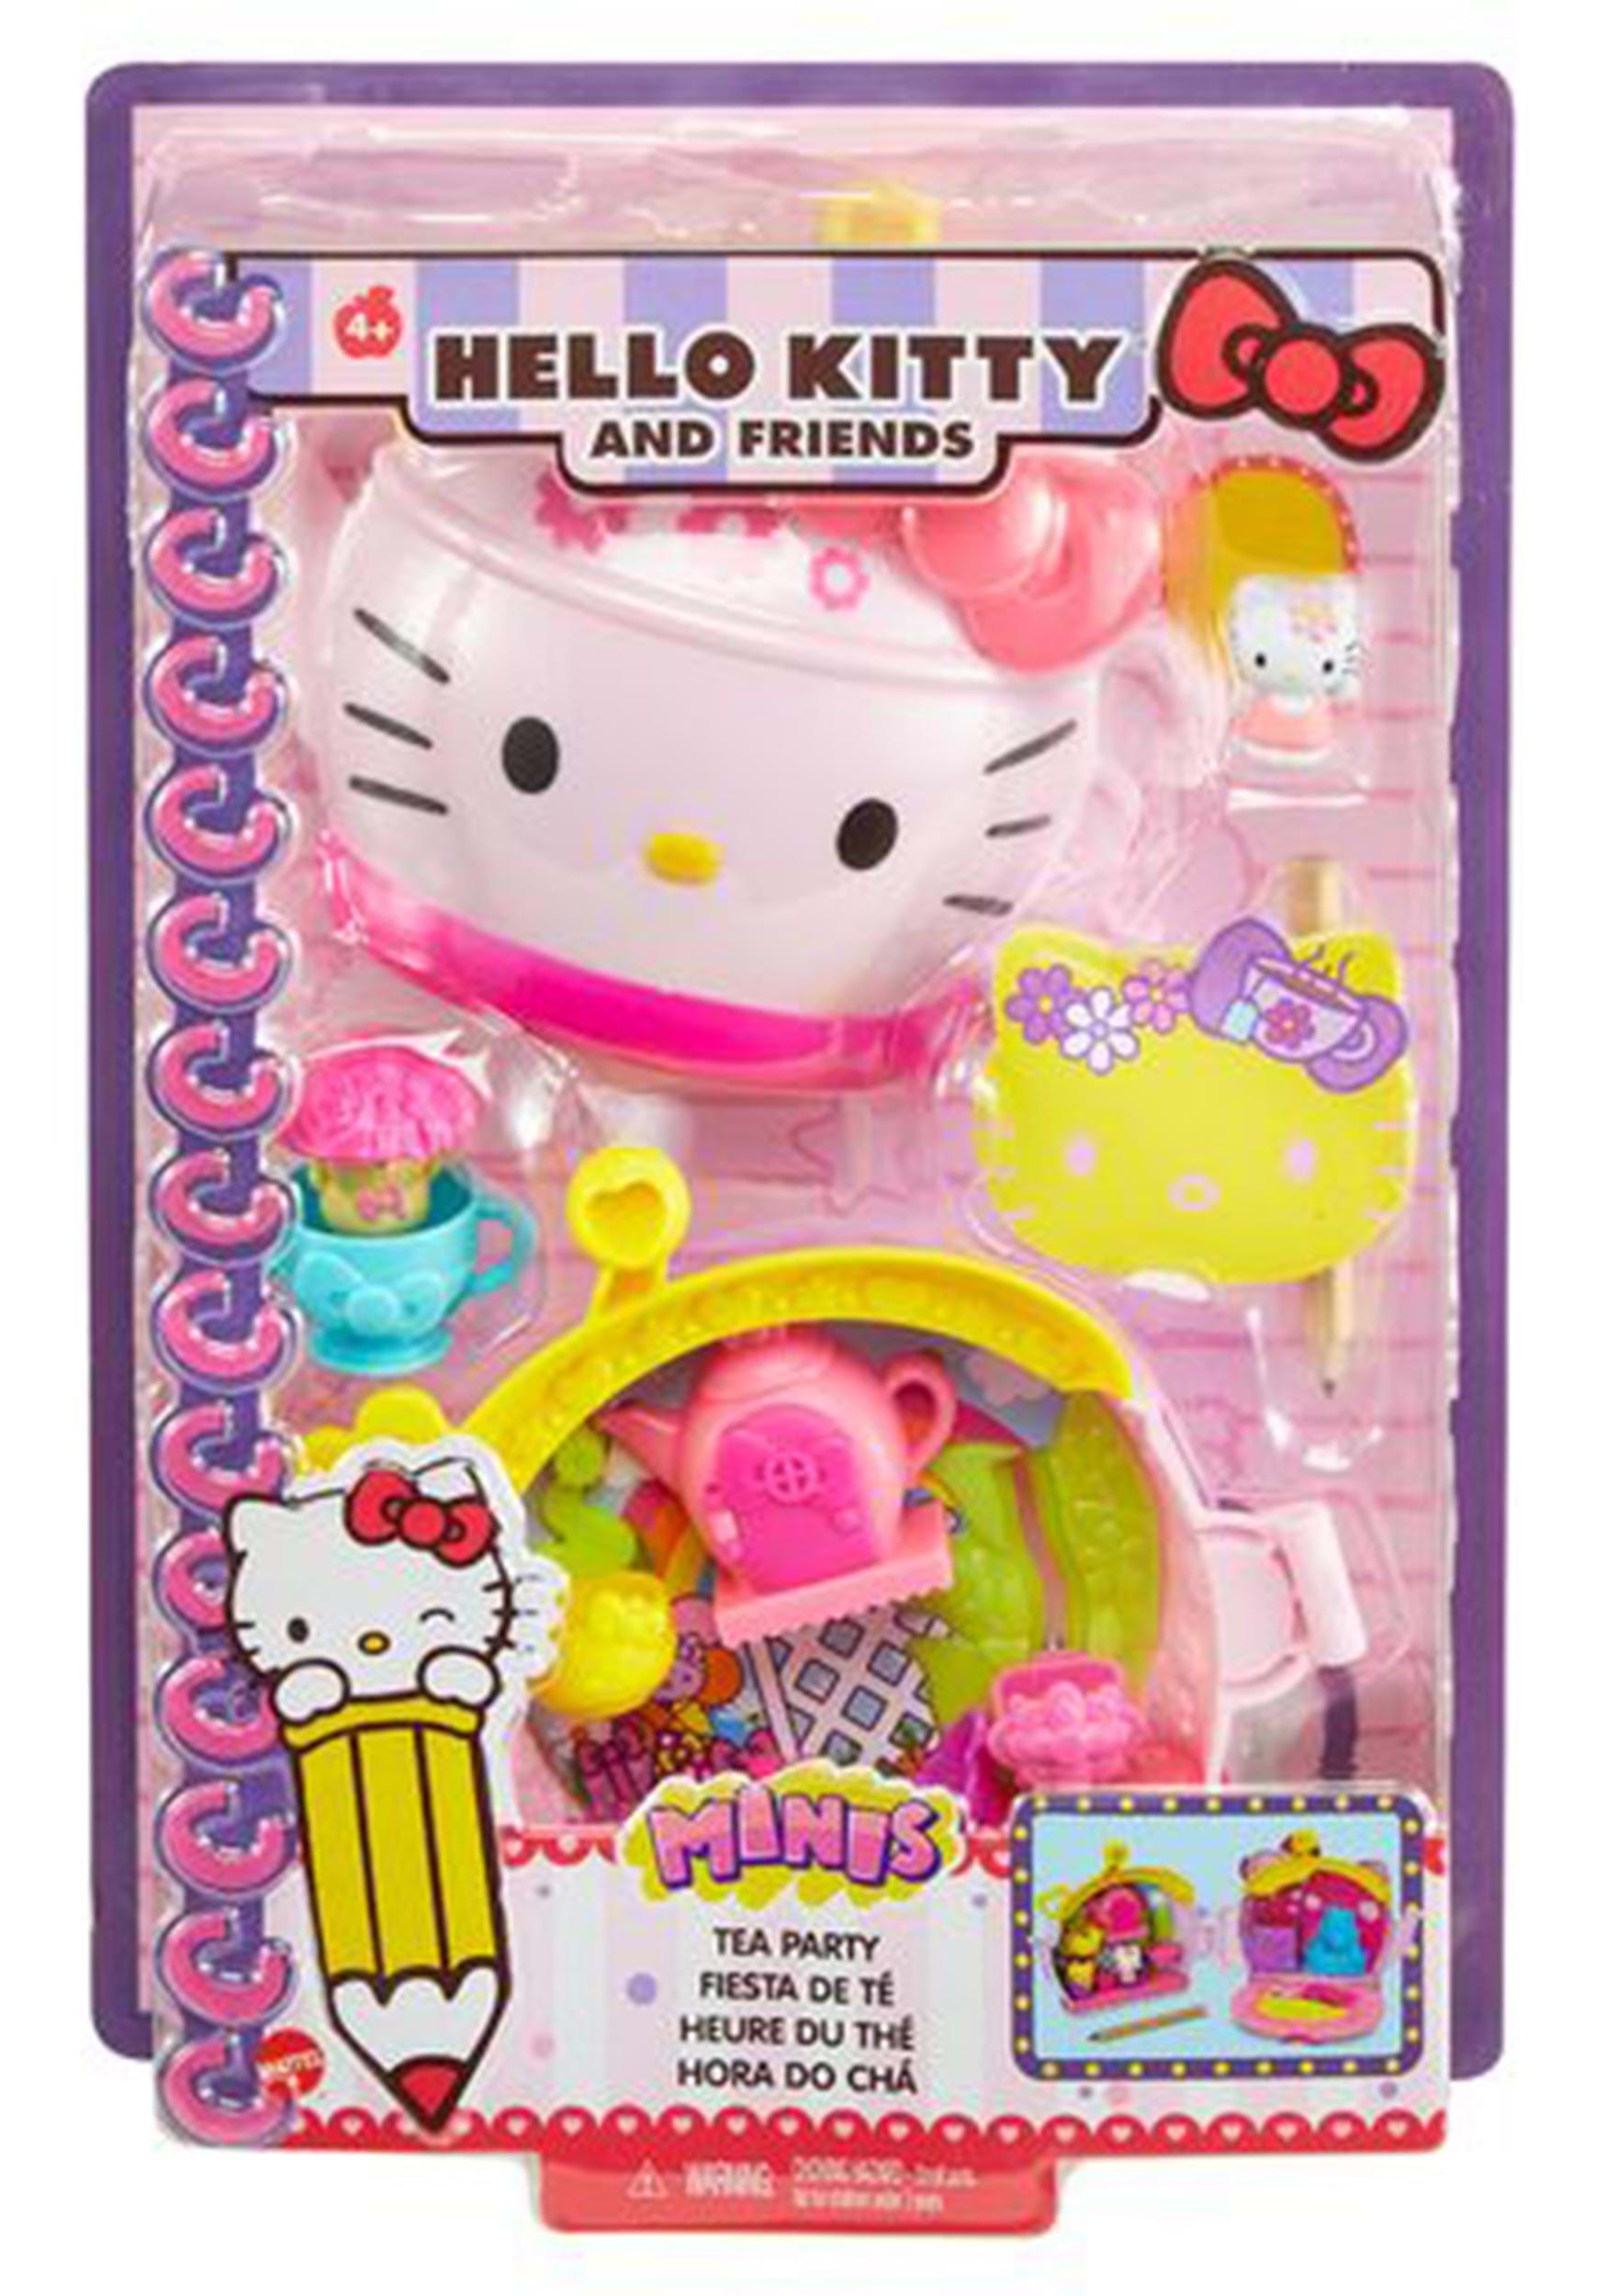 https://images.fun.com/products/76751/2-1-185564/hello-kitty-friends-compact-teapot-playset-alt-1.jpg